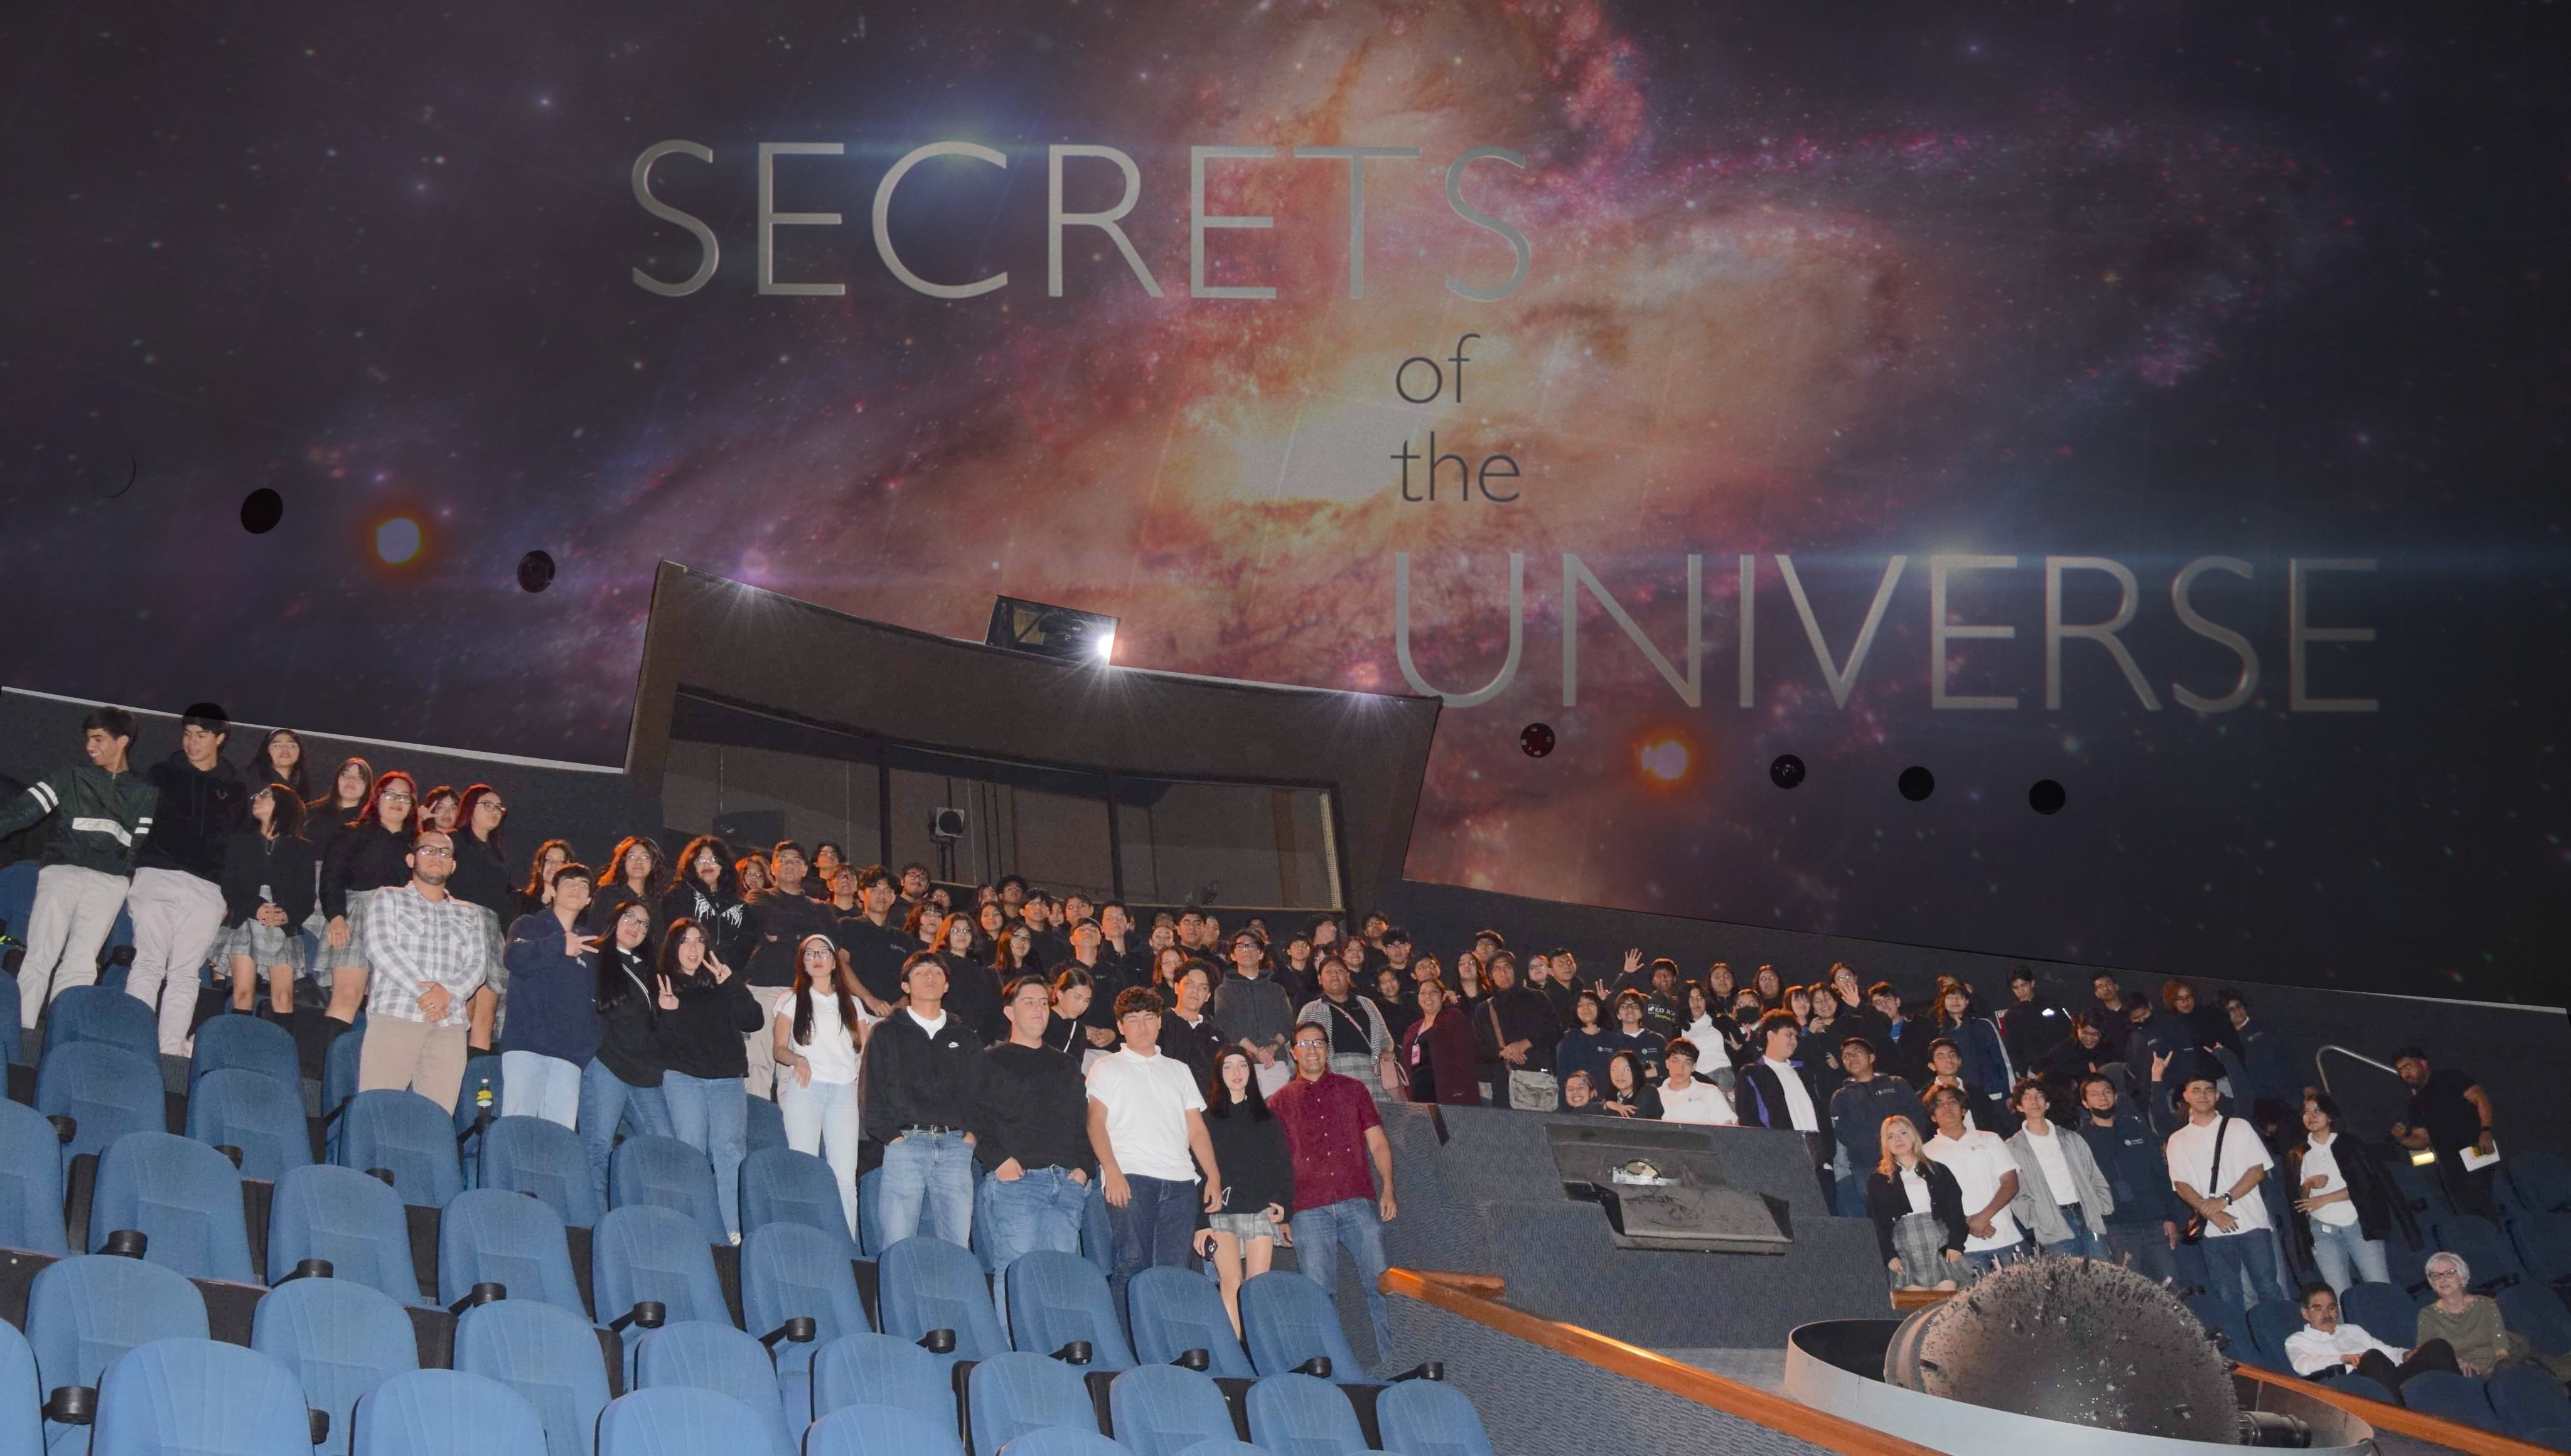 Manuel Calderón de la Barca Sánchez is standing with a group of students in a large theater with the words Secrets of the Universe written in the background 